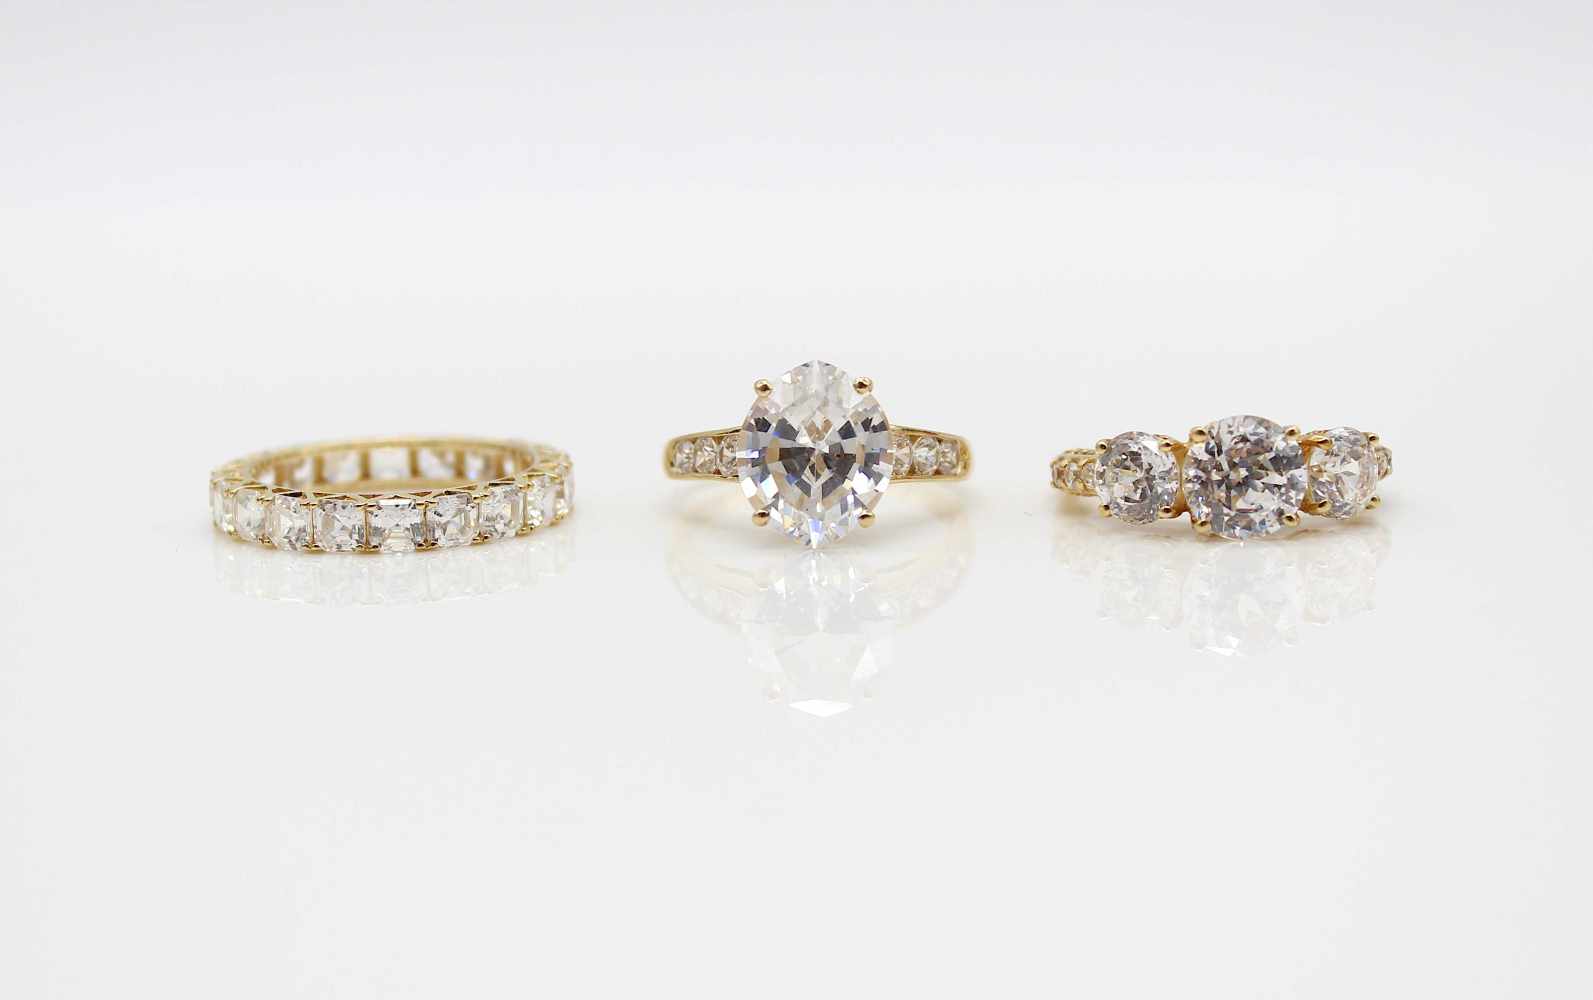 2 rings tested for 585 and 1 Memoire Ring 585 gold with Cubic Zirconias.weight 12 g, sizes : 60, 56, - Image 2 of 2